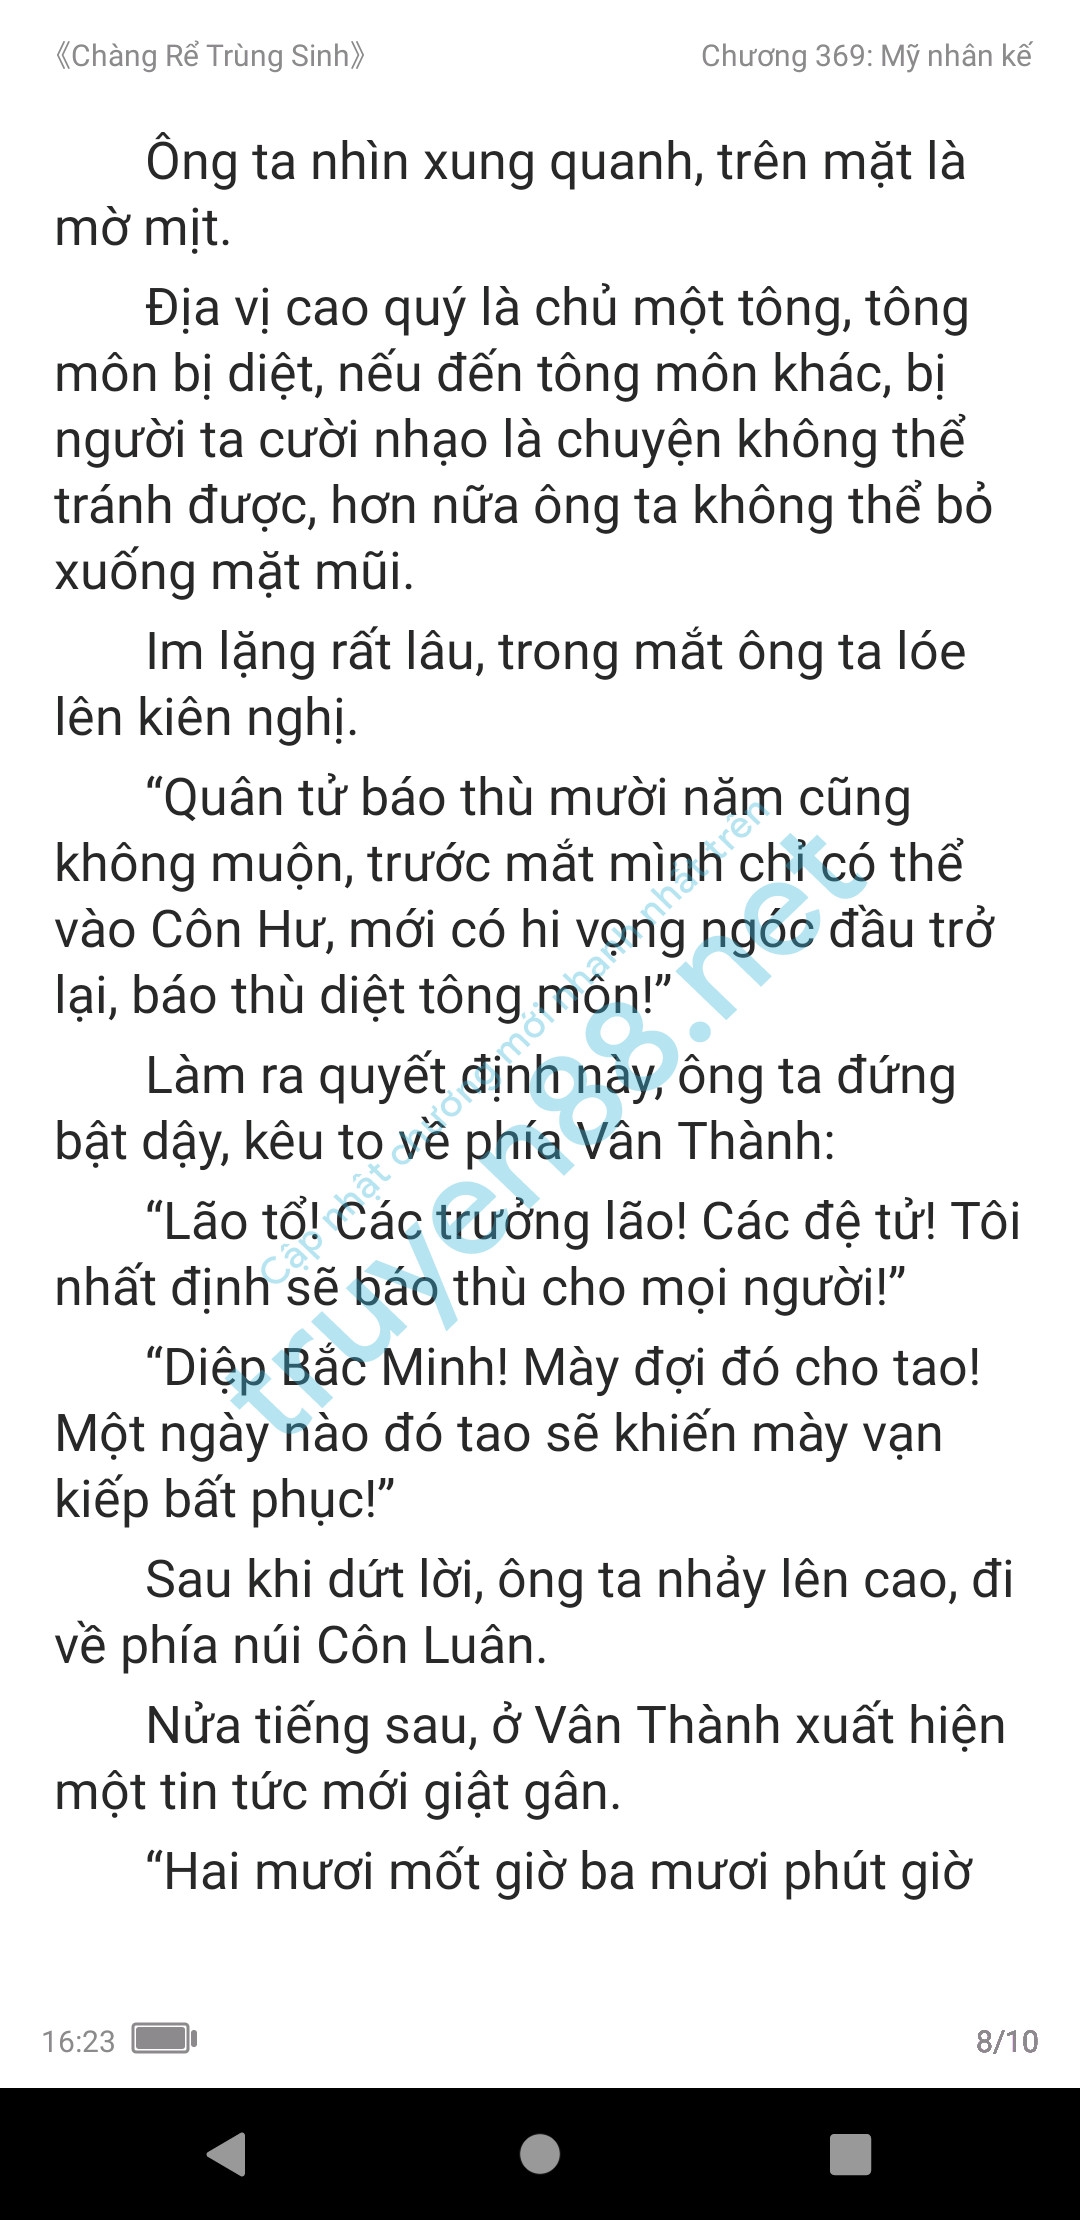 chang-re-trung-sinh-369-0